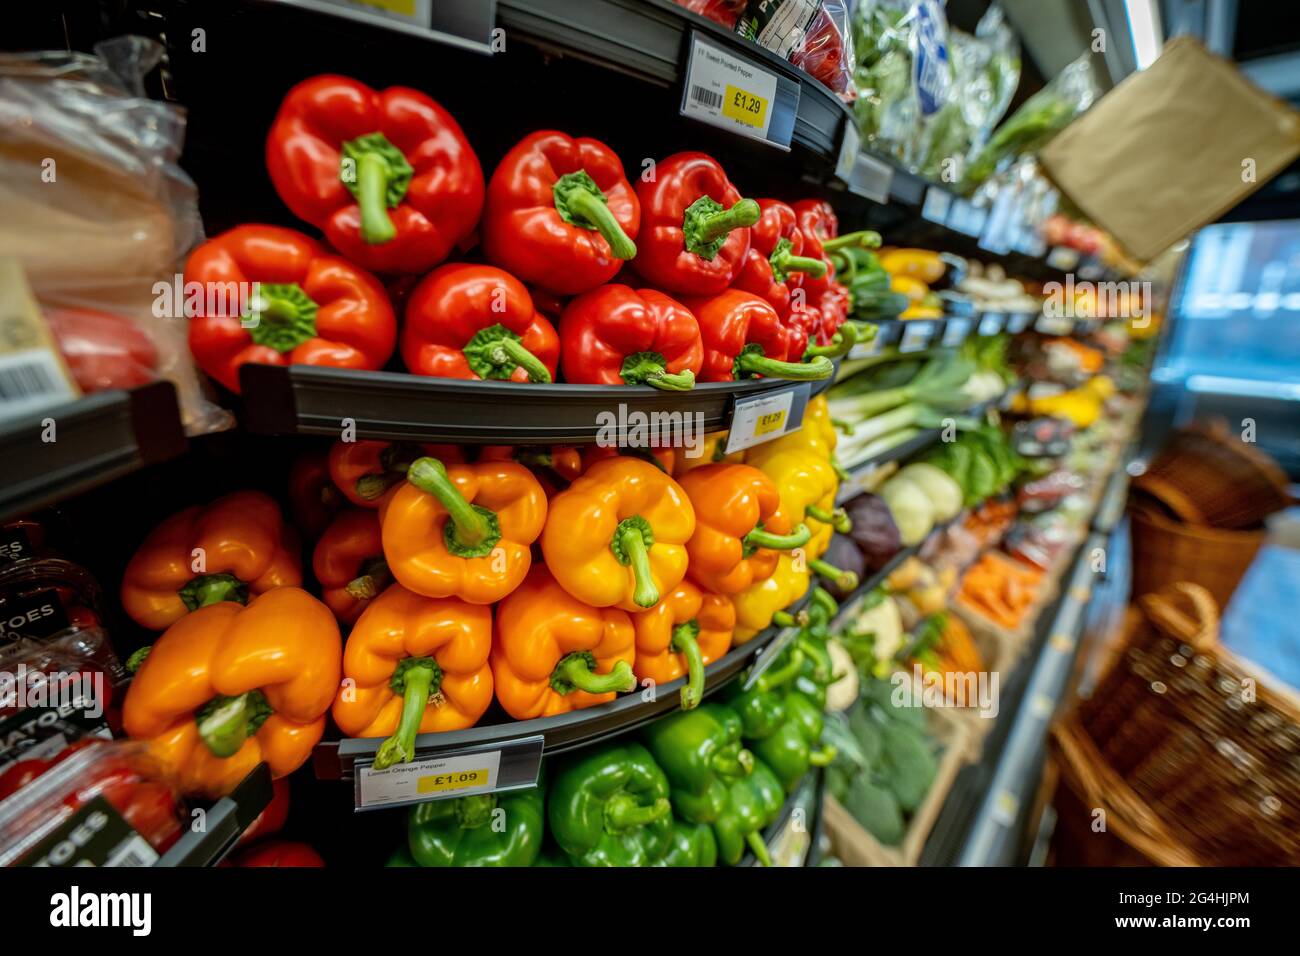 Variety of vegetables on sale at a supermarket. Mainly focussed on peppers here. Stock Photo